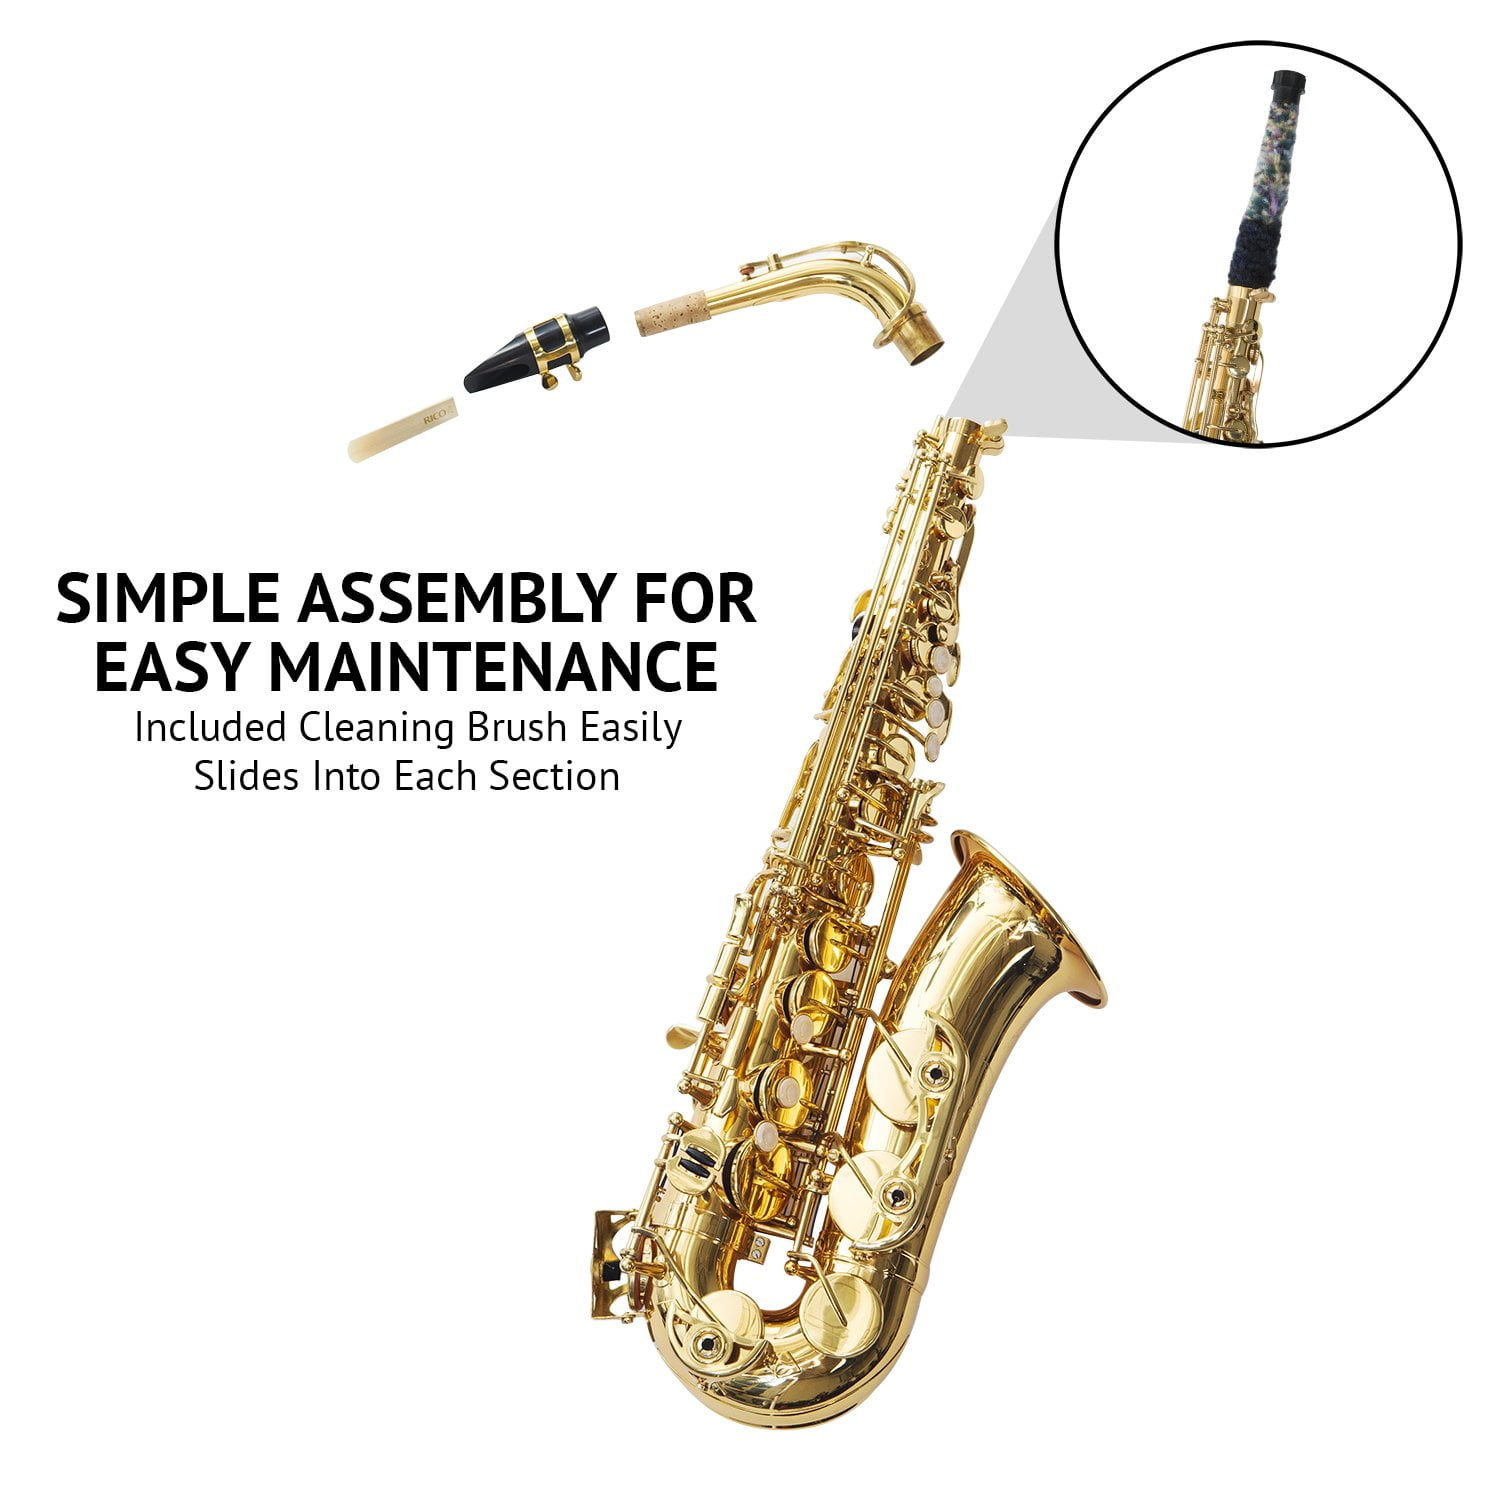 LyxJam Alto Saxophone E Flat Brass Sax Beginners Kit, Mouthpiece, Neck  Strap, Cleaning Cloth Rod, Gloves, Hard Carrying Case With Removable  Straps,10 